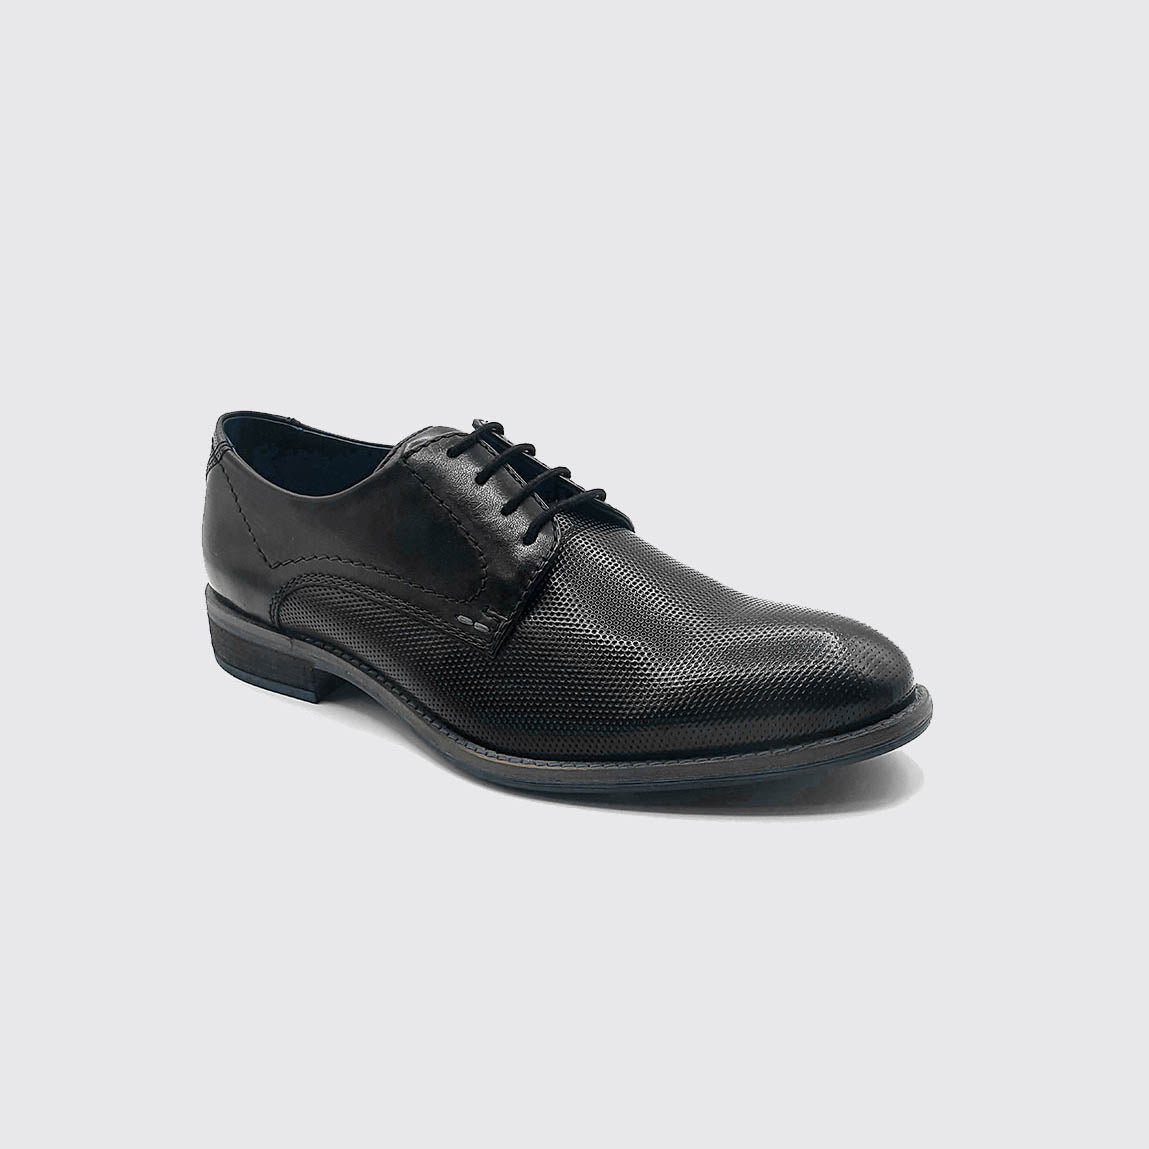 Pin on Dress Shoes for Men